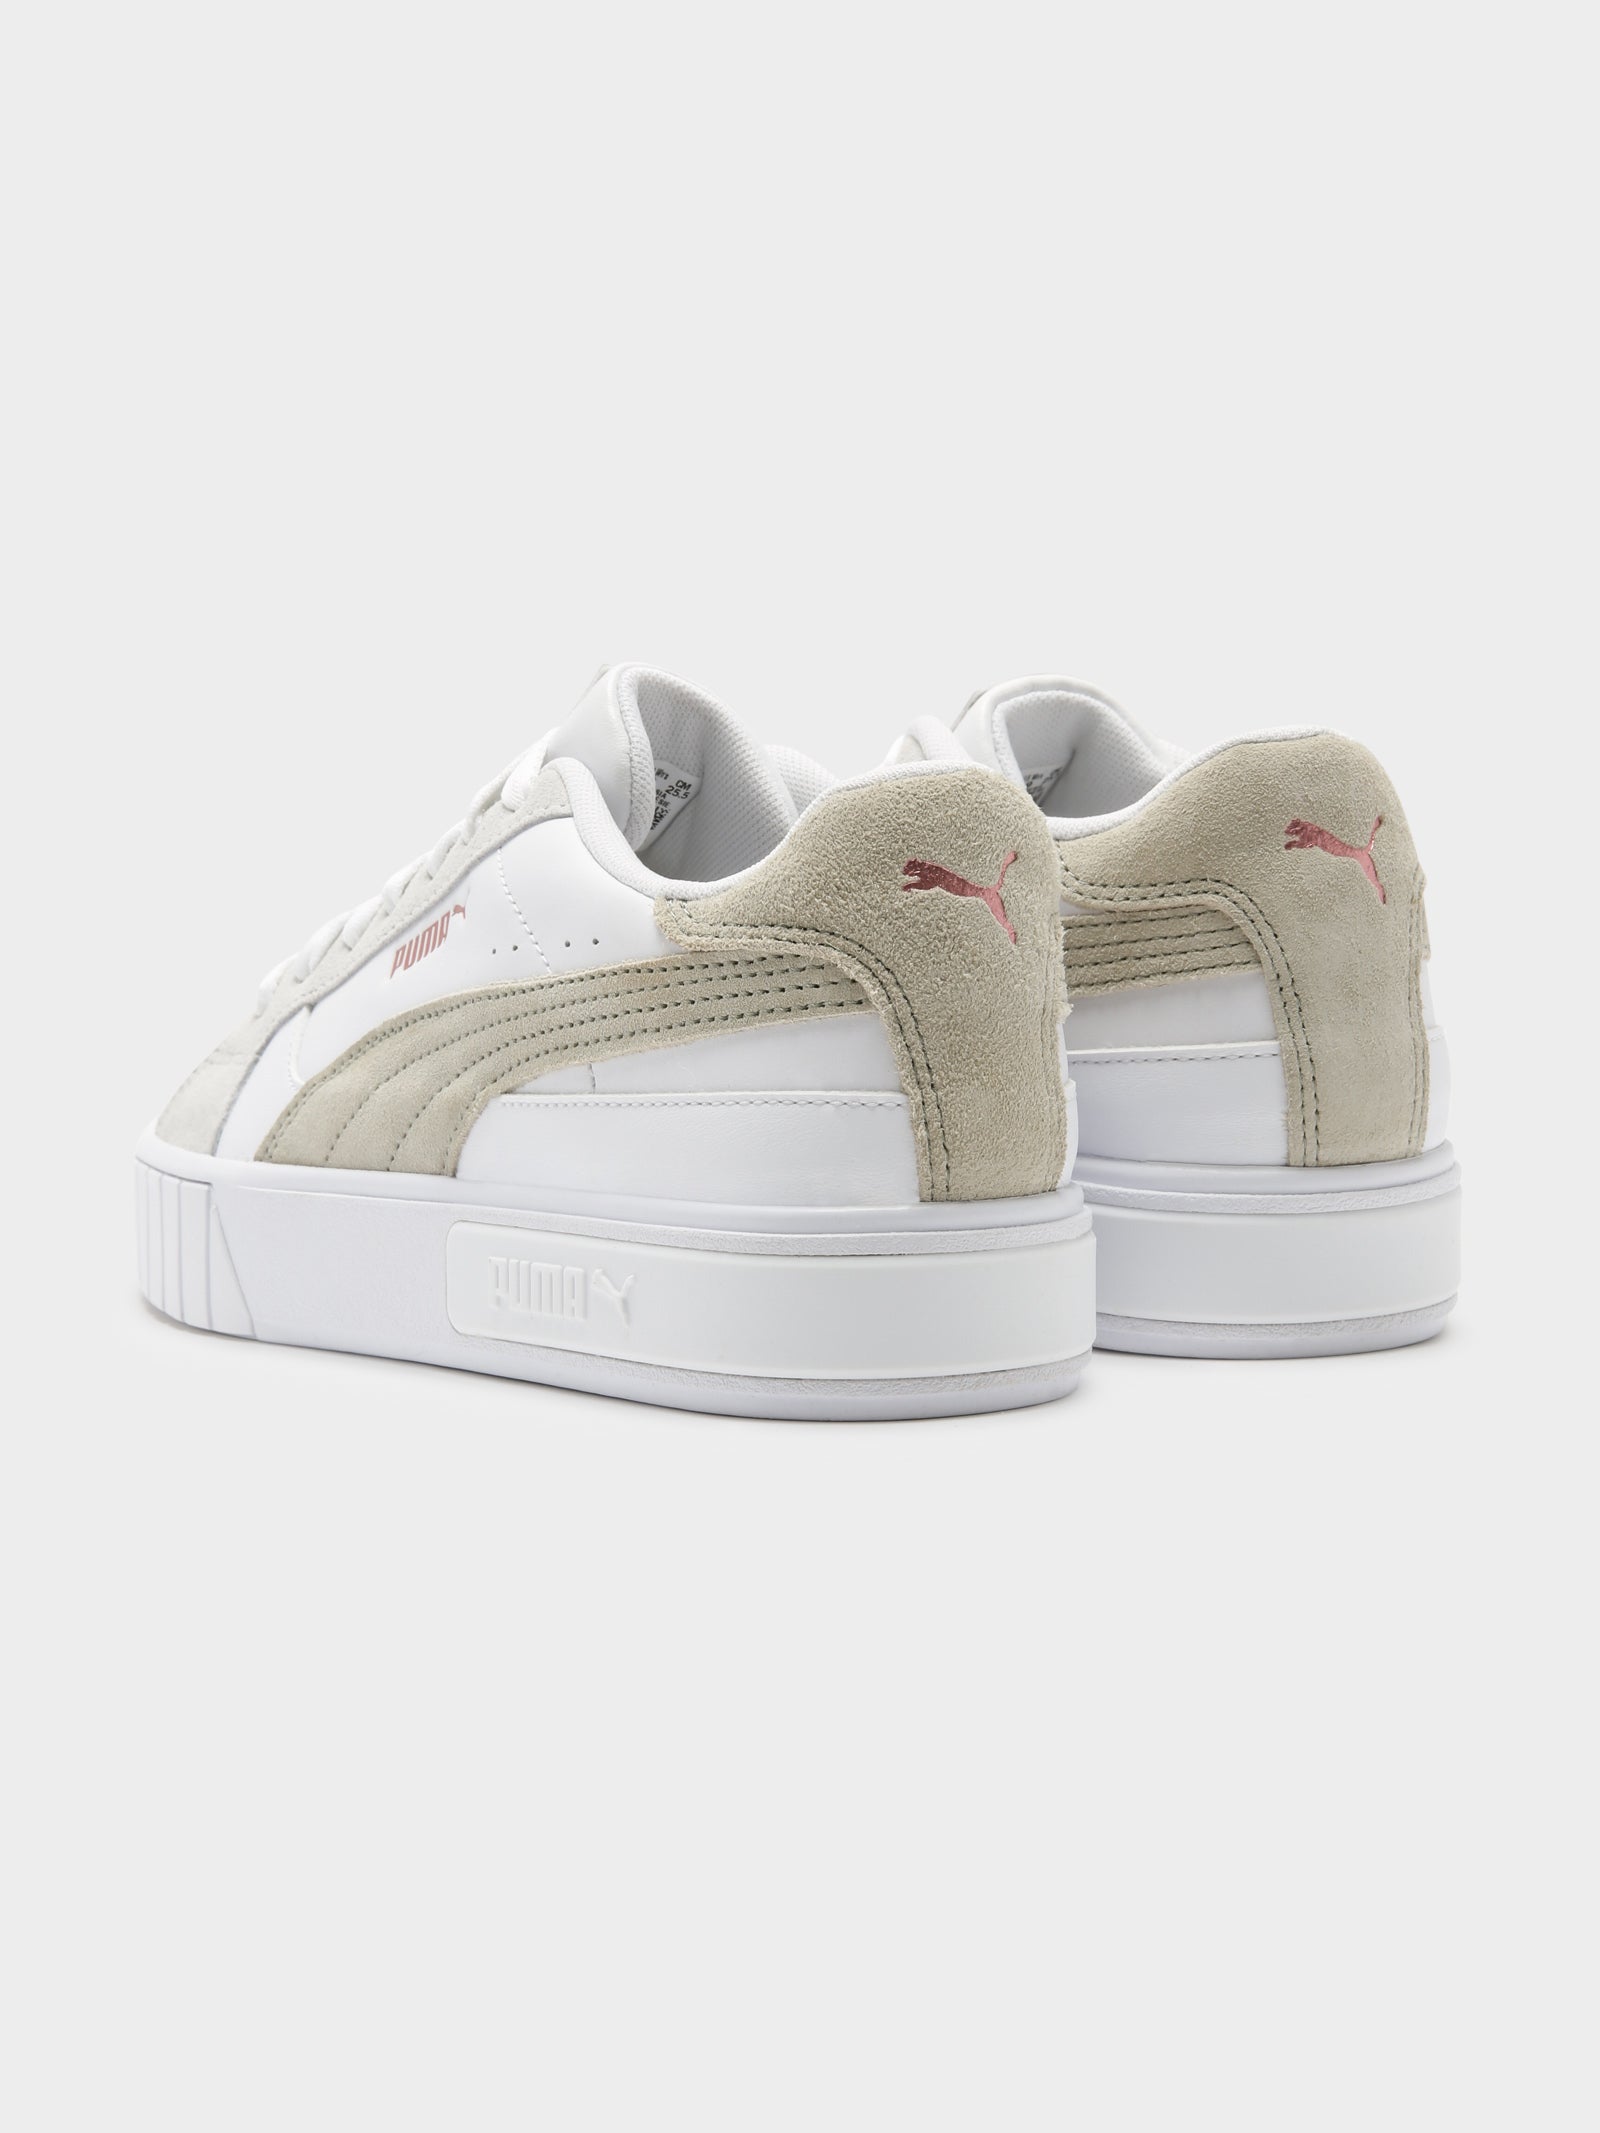 Womens Cali Star Mix Sneakers in White & Pebble Grey